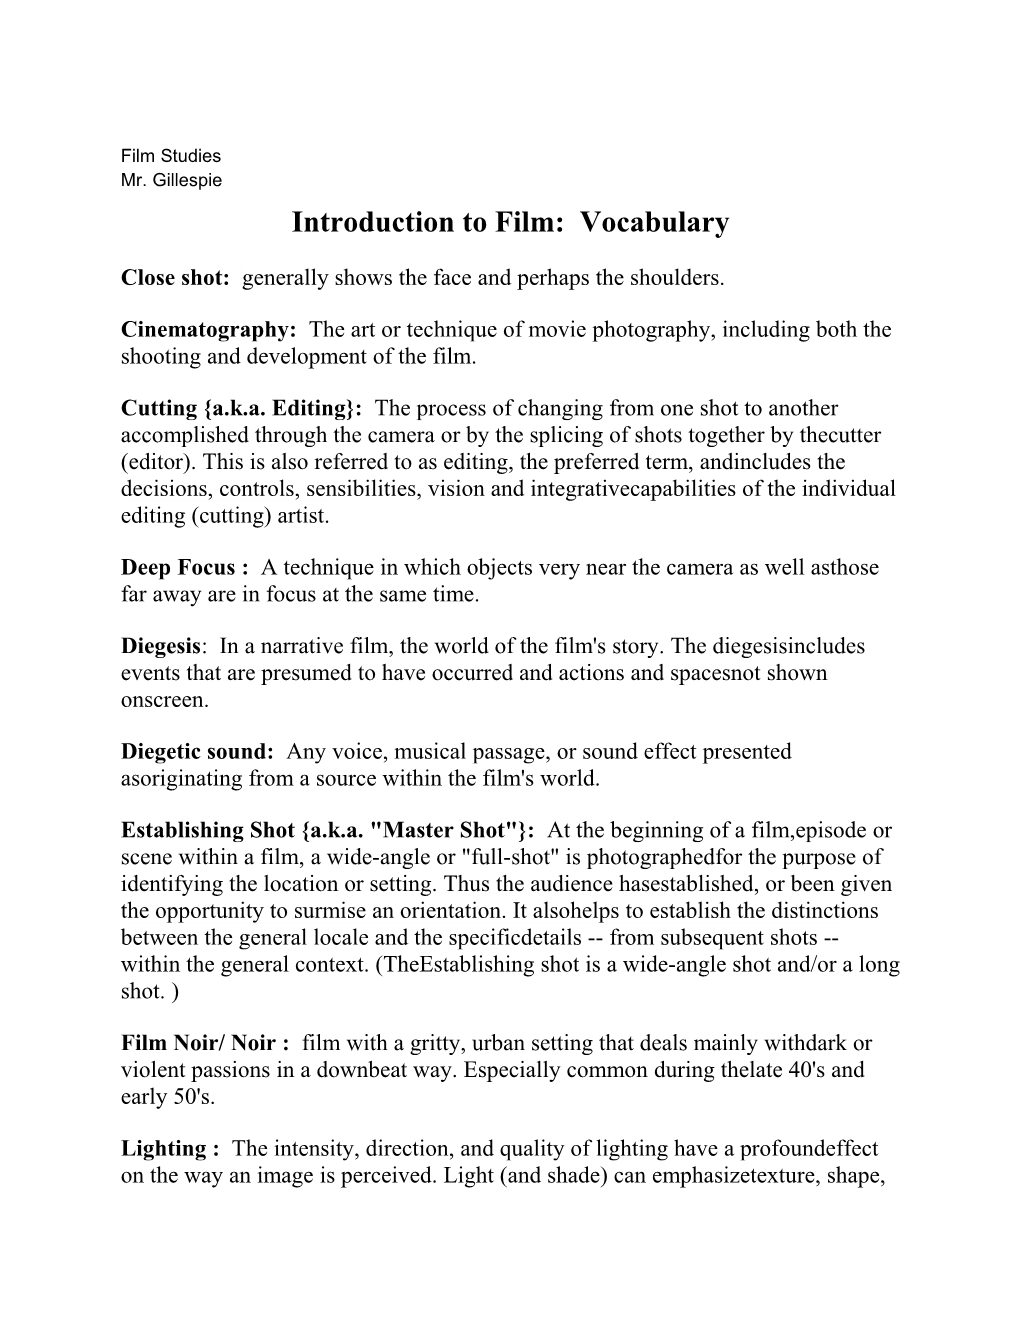 Introduction to Film: Vocabulary